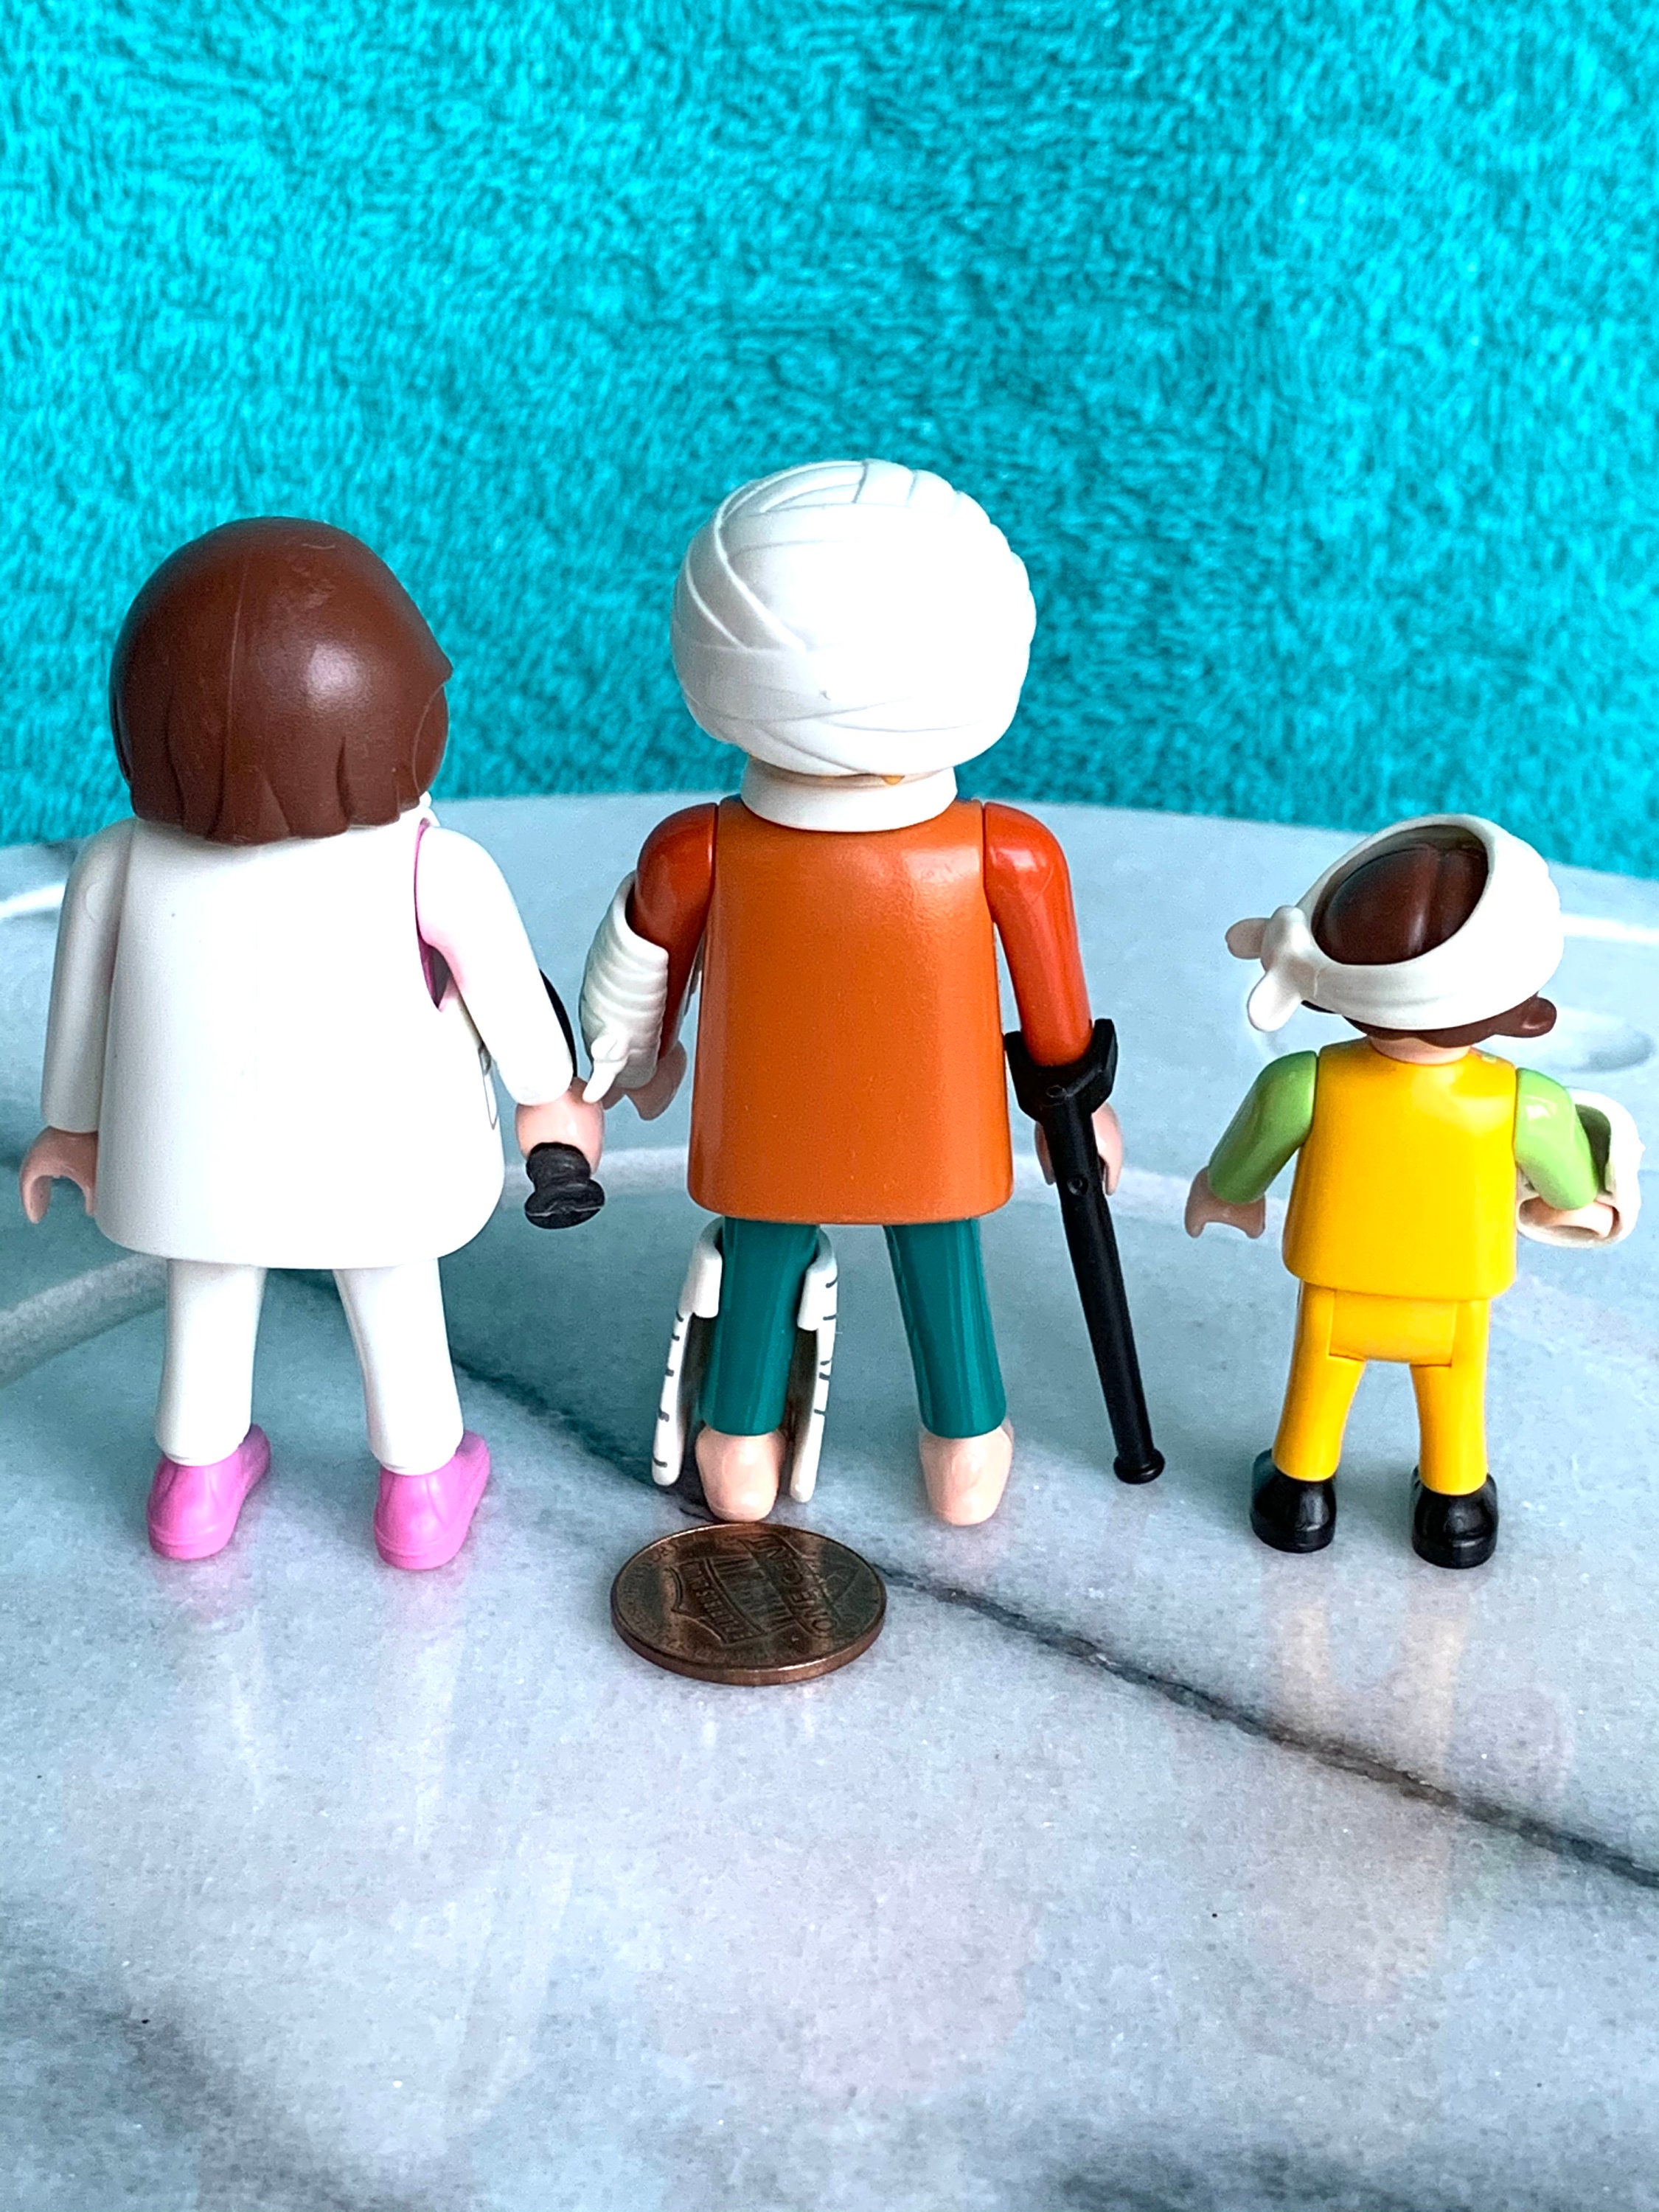 PLAYMOBIL HOSPITAL DOCTOR Gift Action Figure Toy, Medical Nurse With  Patient After Accident, Dad at the Clinic With Kid Bandage, Surgery 